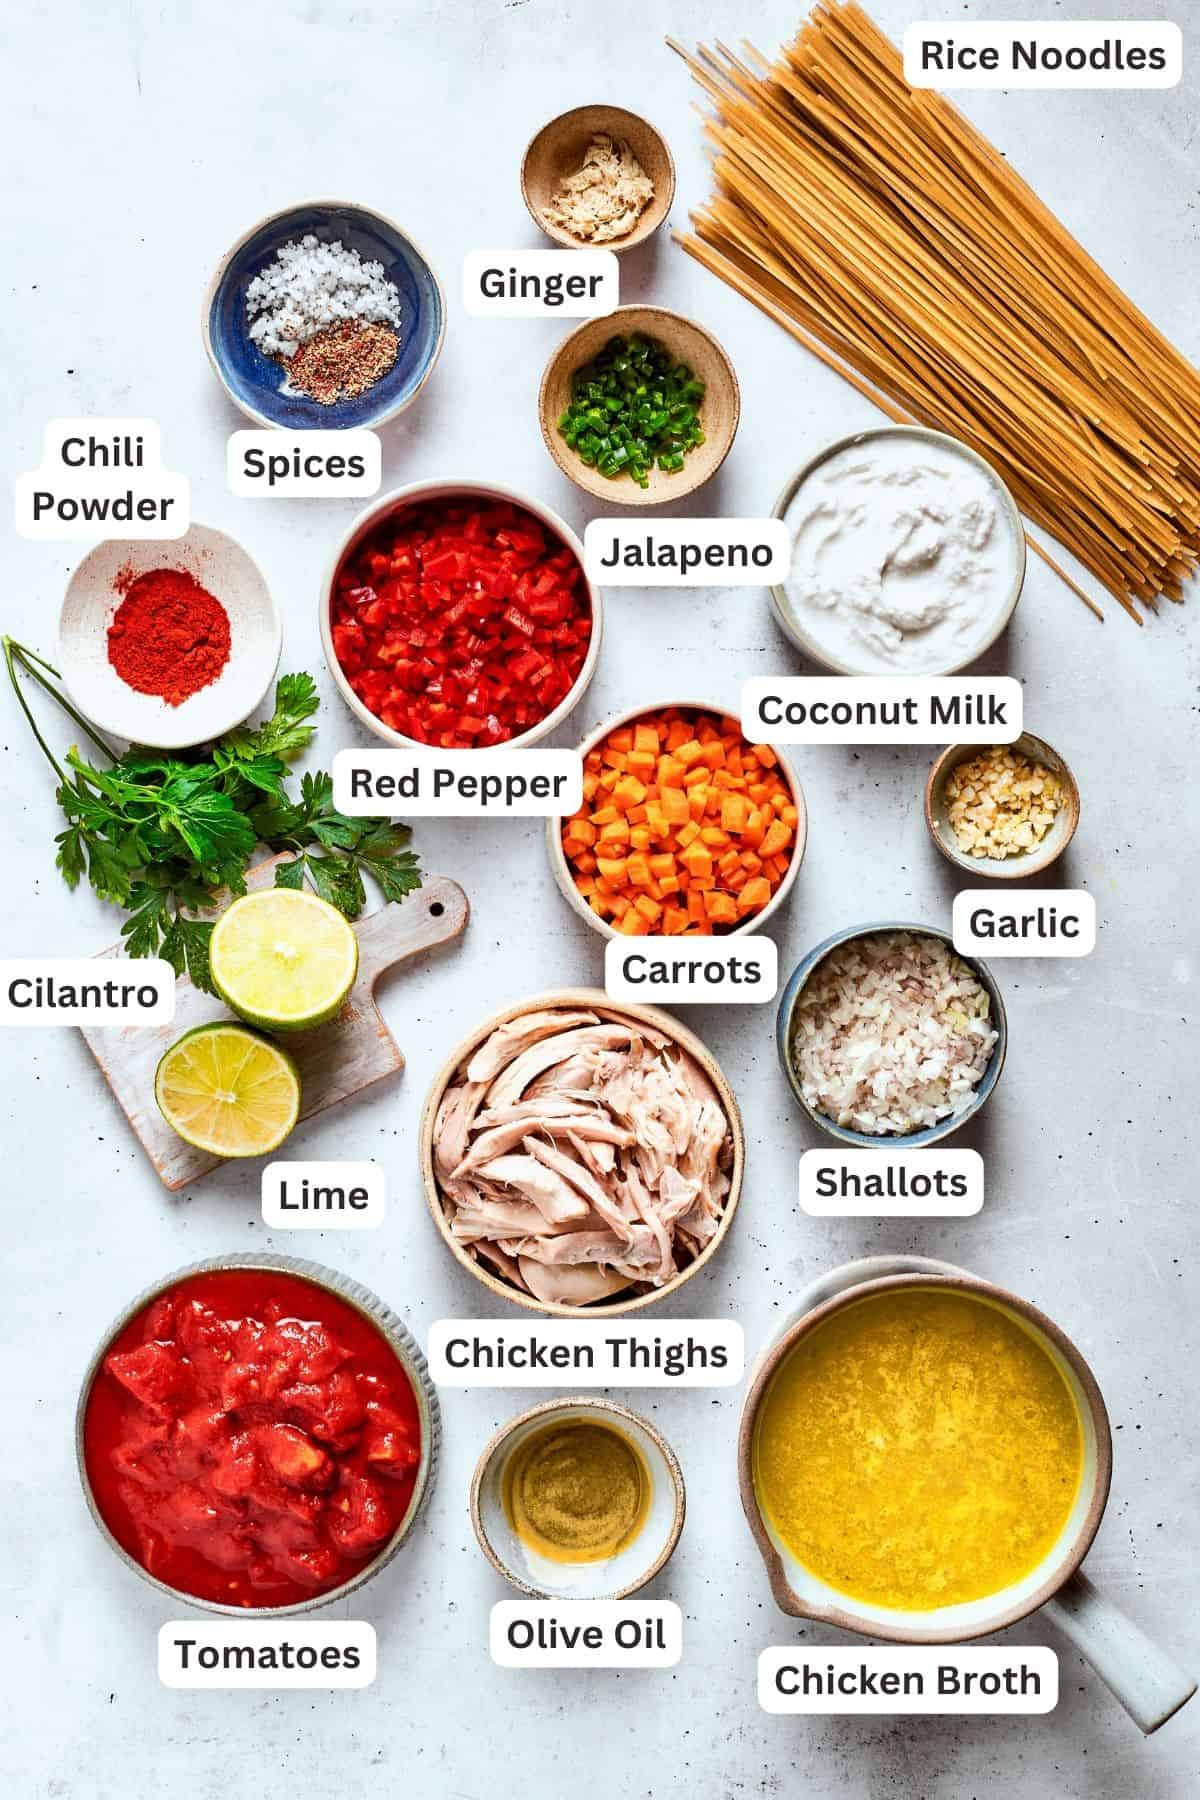 The ingredients for spicy chicken soup are shown portioned out: red pepper, chicken, coconut milk, garlic, carrots, shallots, lime, cilantro, broth, noodles, tomatoes, jalapeno, chili powder.